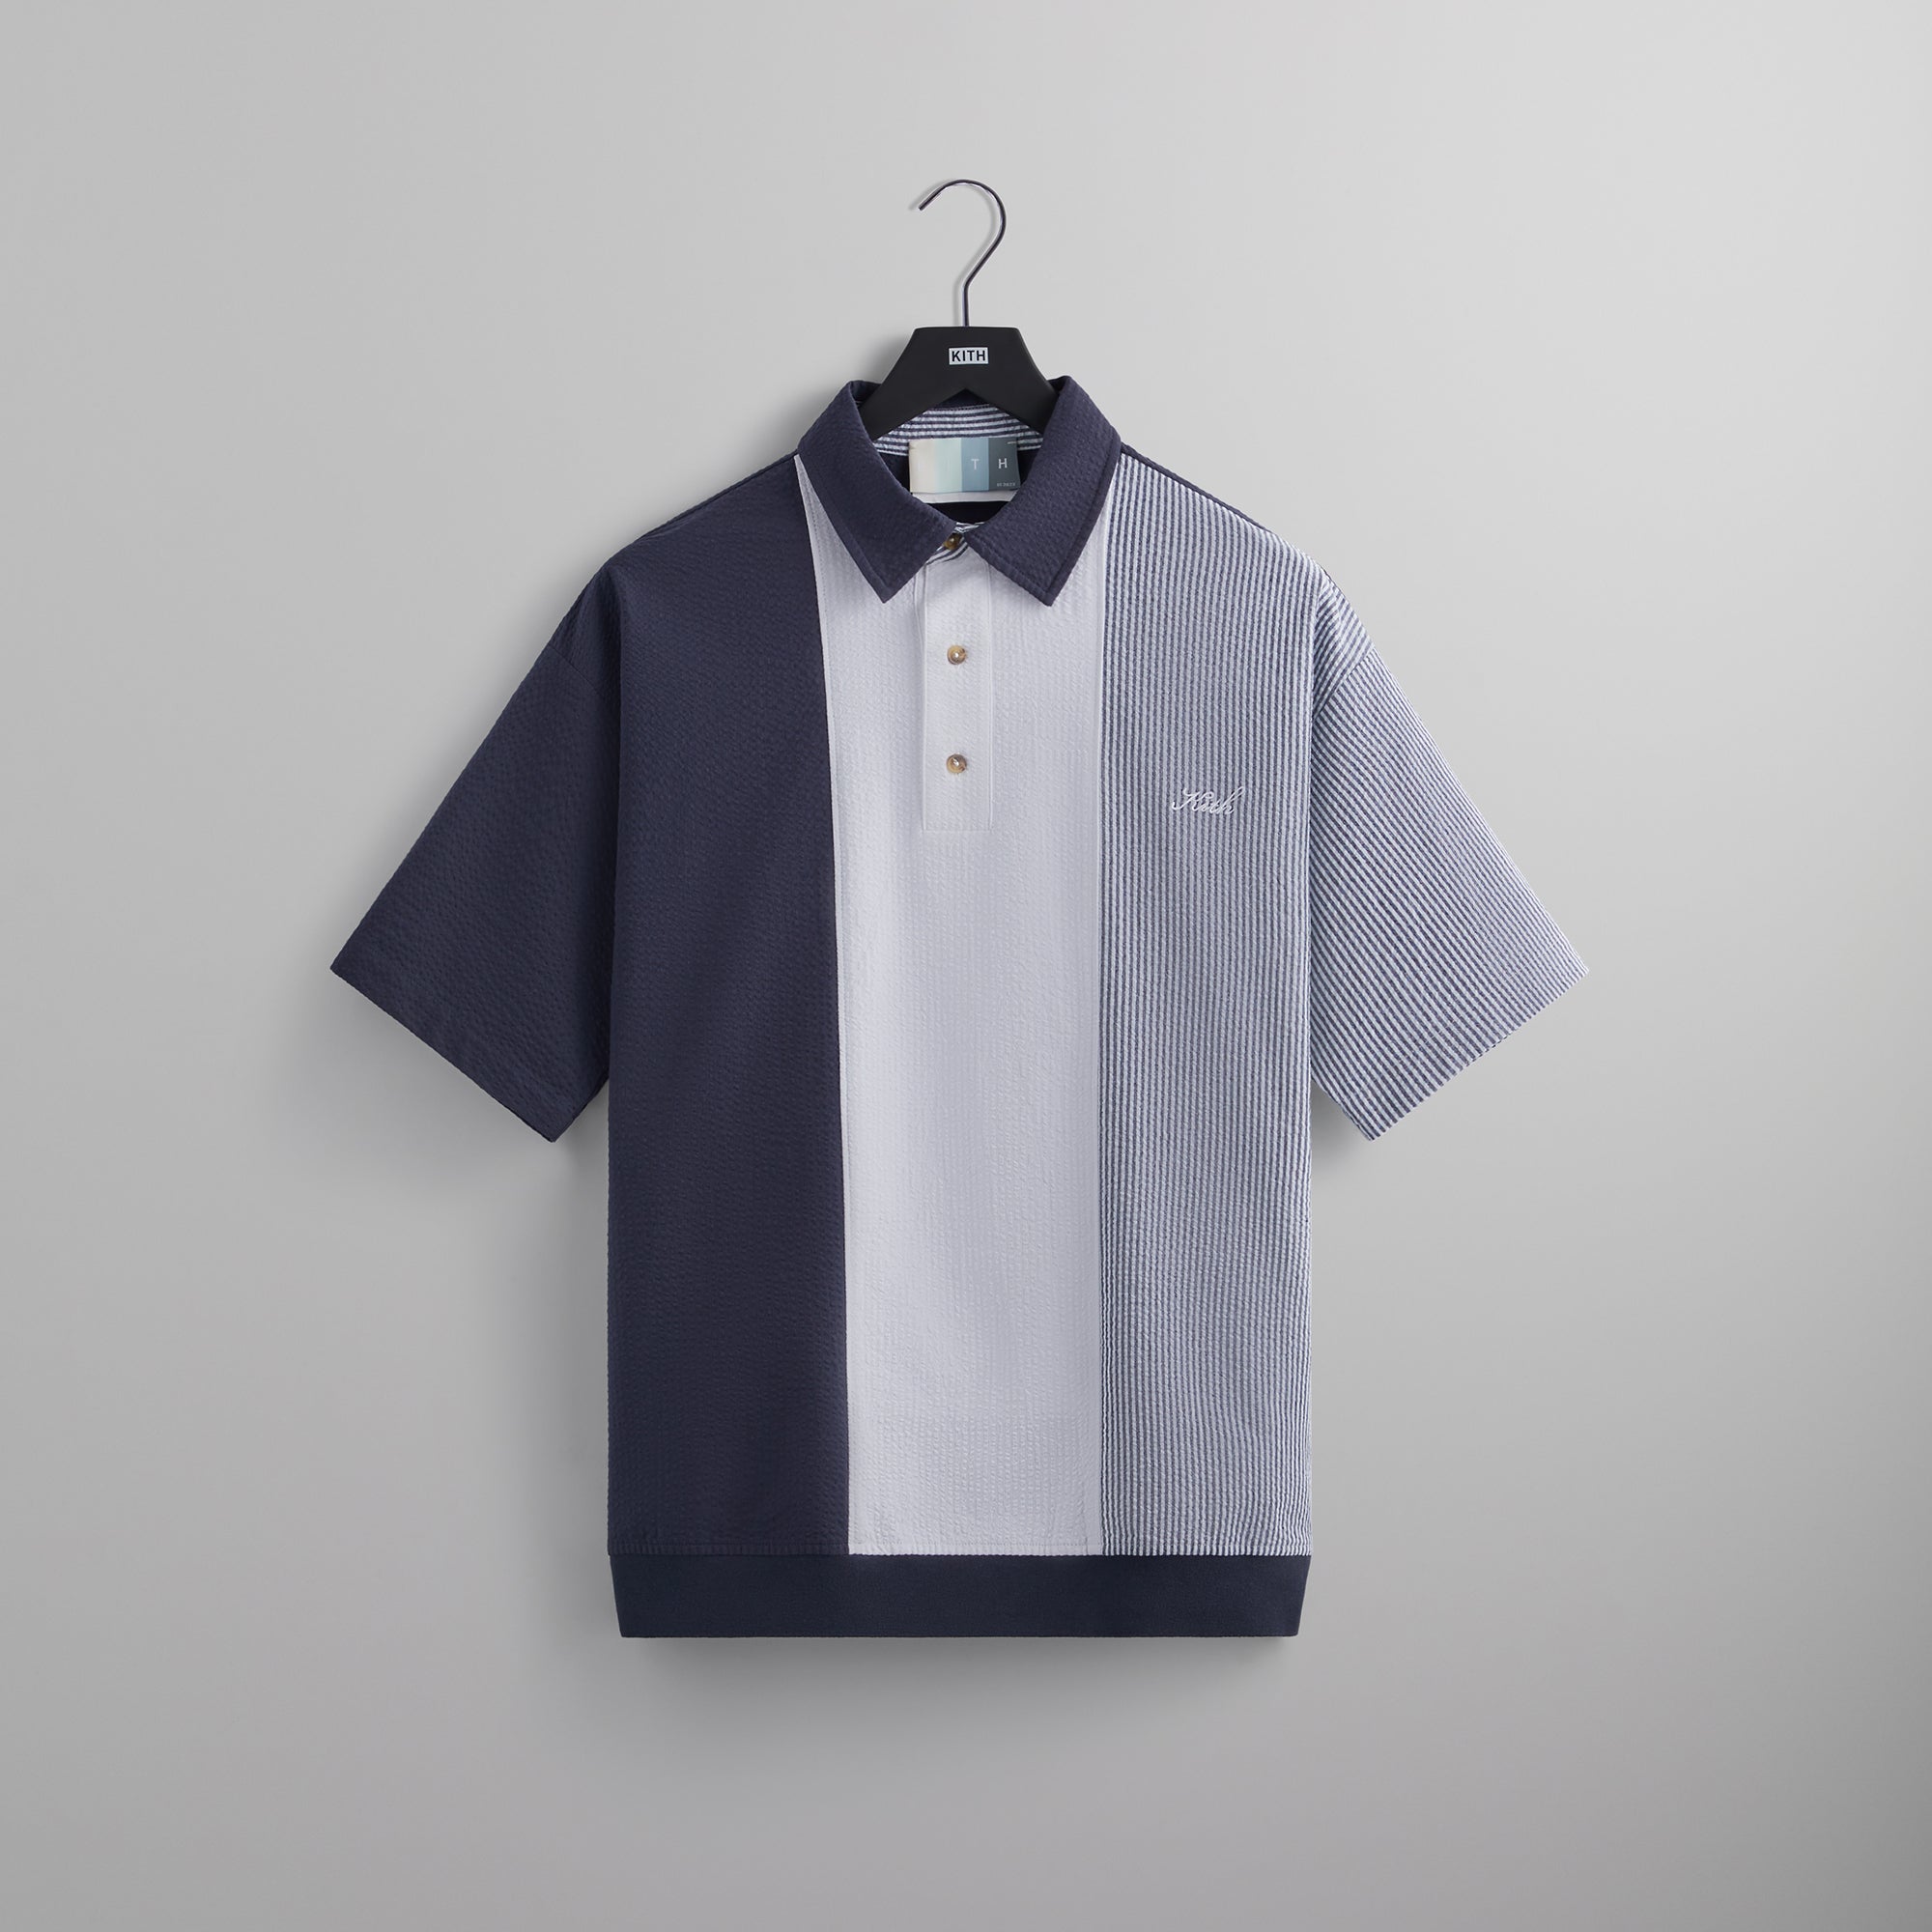 Kith Harway Polo - Nocturnal